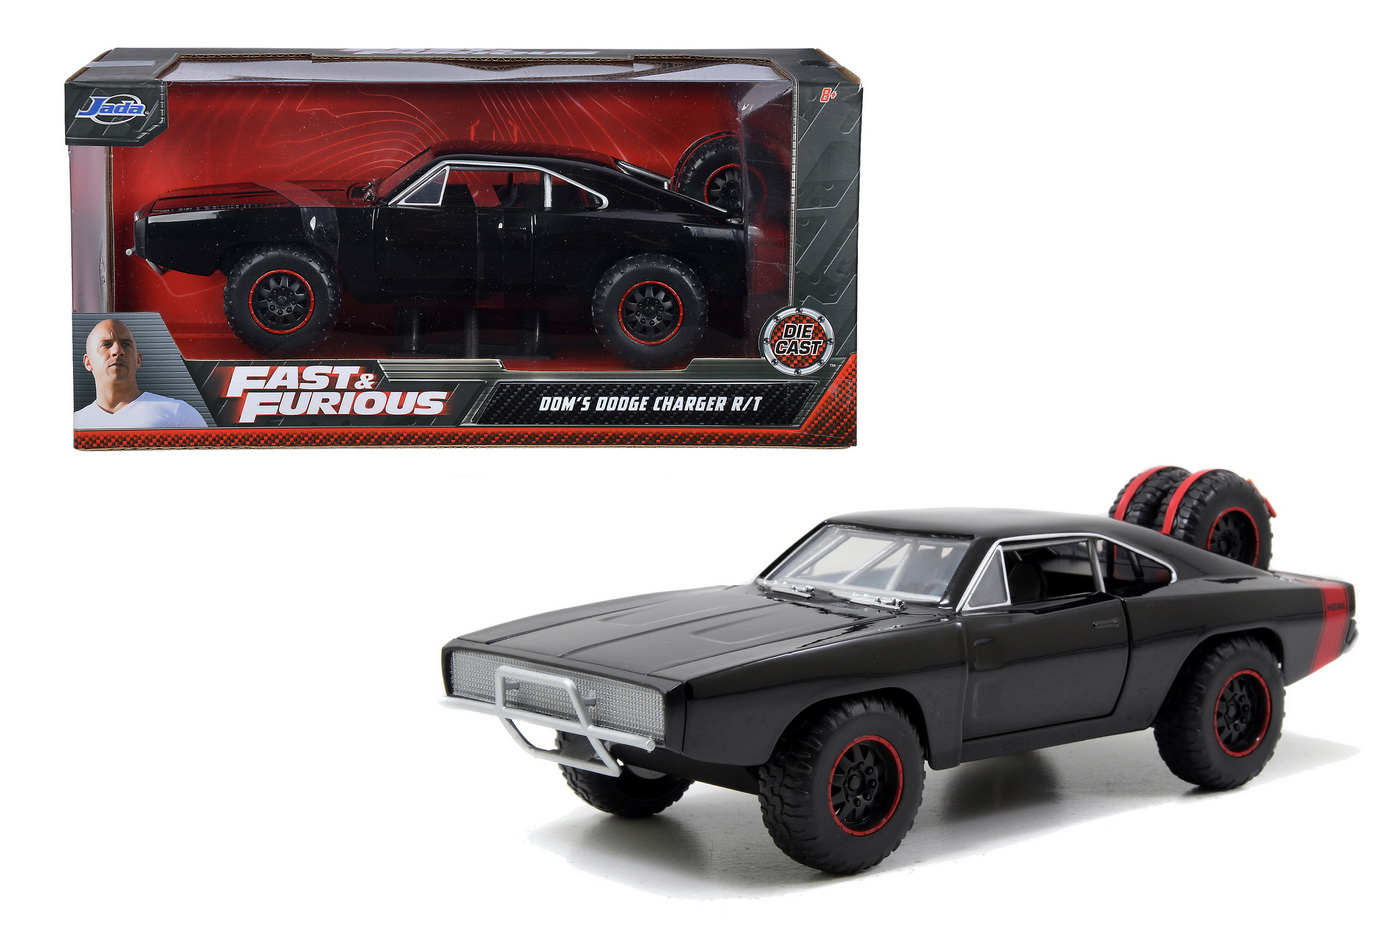 Masinuta Fast And Furious 1970 Dom’s Dodge Charger Scara 1:24